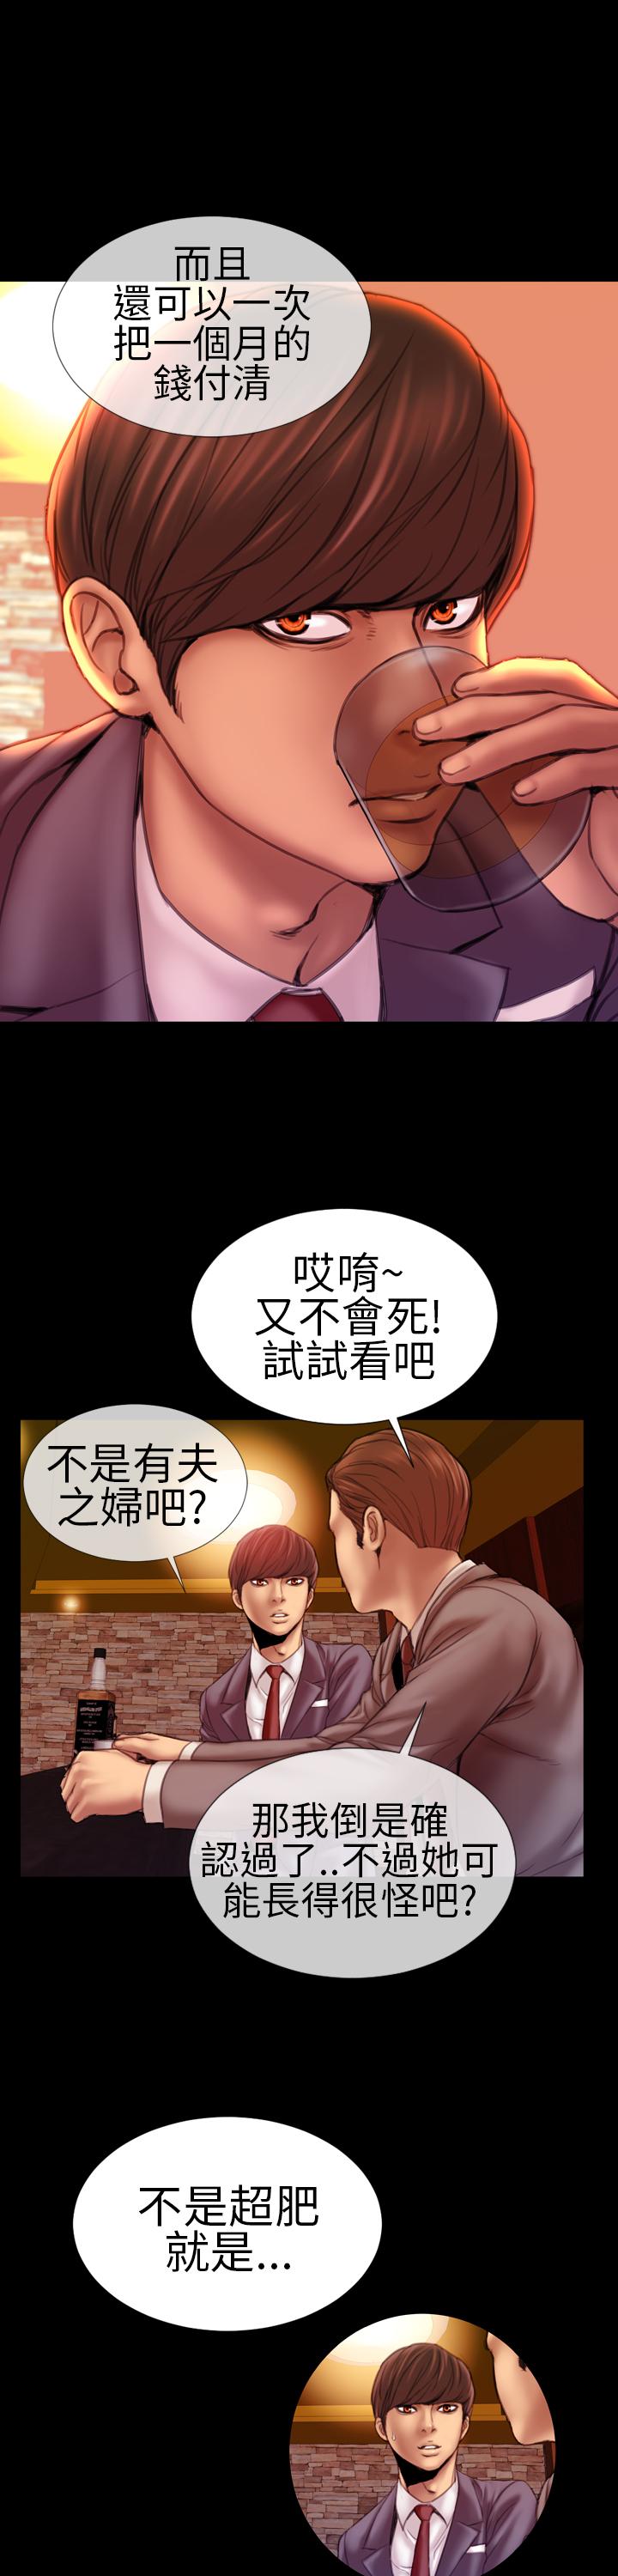 MY WIVES (淫蕩的妻子們) Ch.3 (Chinese) 4